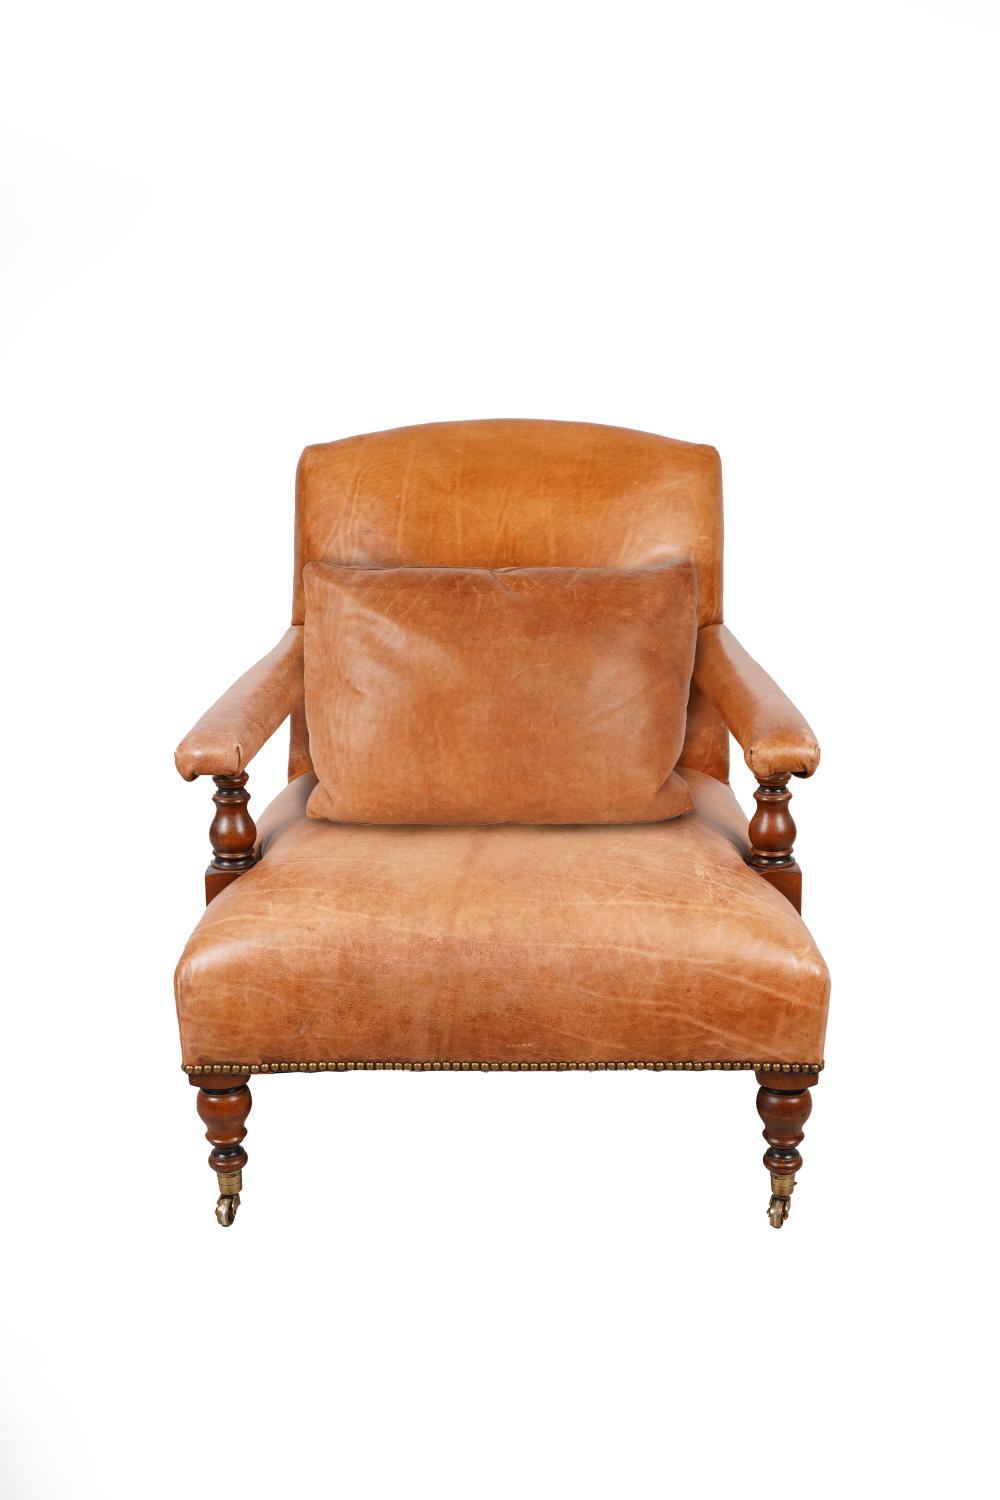 RALPH LAUREN OLIVER LEATHER ARMCHAIRwith 3342f6